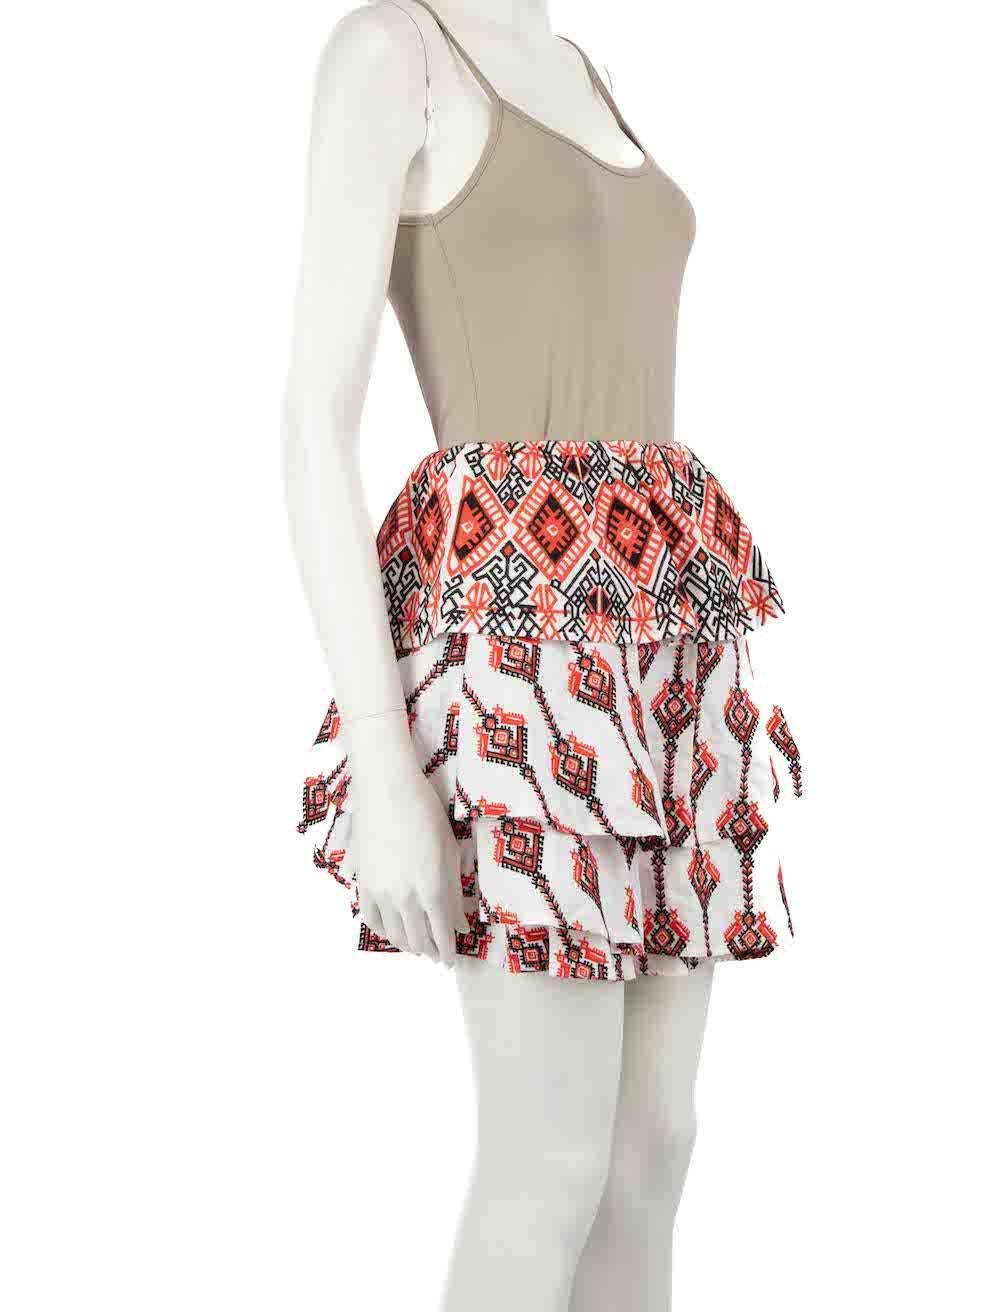 CONDITION is Very good. Hardly any visible wear to skirt is evident on this used Caroline Constas designer resale item.
 
 
 
 Details
 
 
 White
 
 Cotton
 
 Skirt
 
 Red embroidered pattern
 
 Knee length
 
 Tiered
 
 Elasticated waistband
 
 
 
